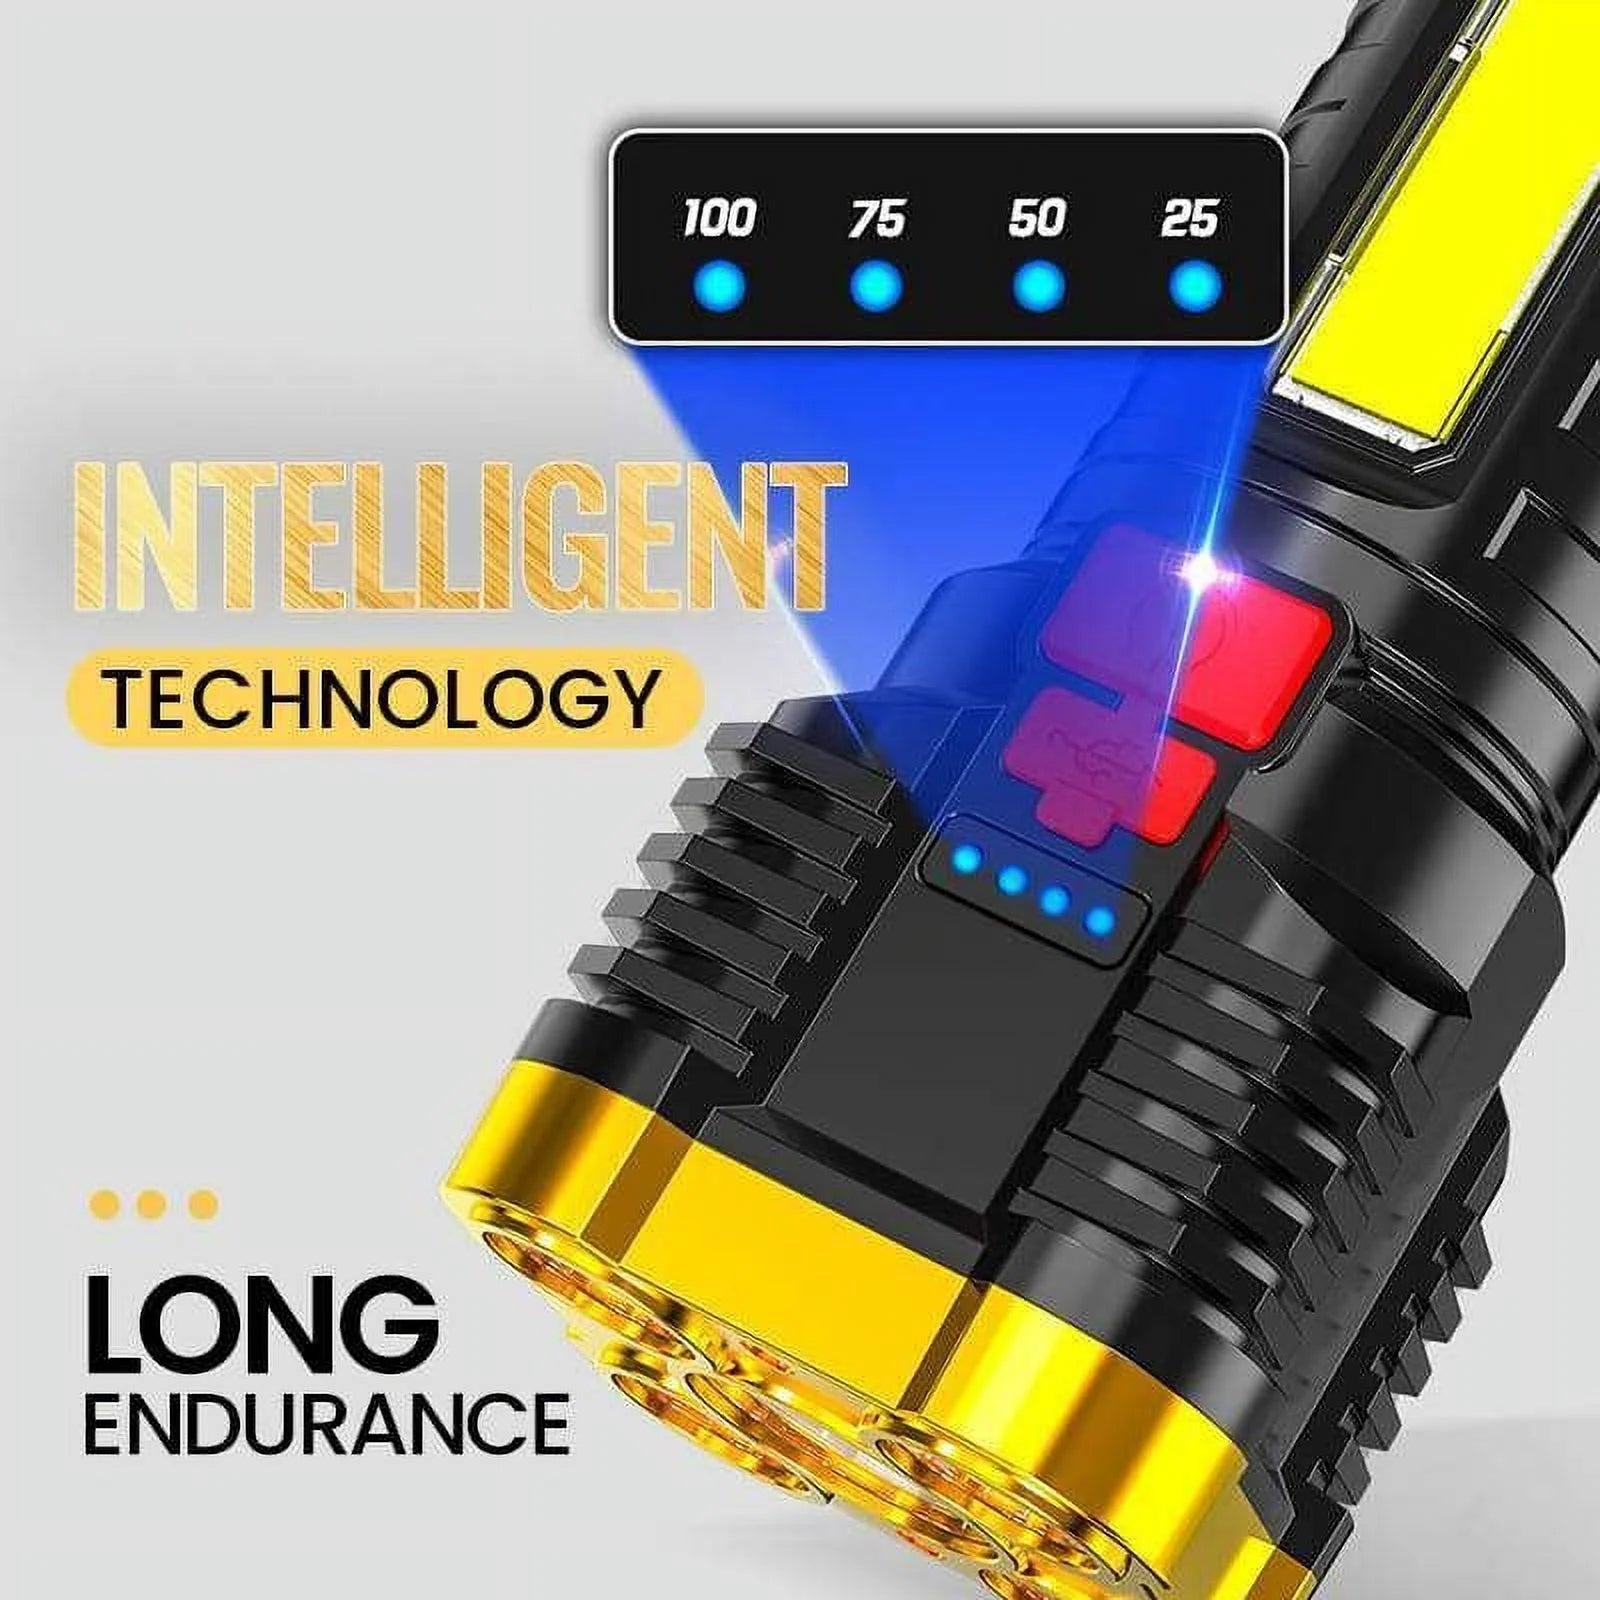 Super Bright LED Torch Flashlight - USB Rechargeable